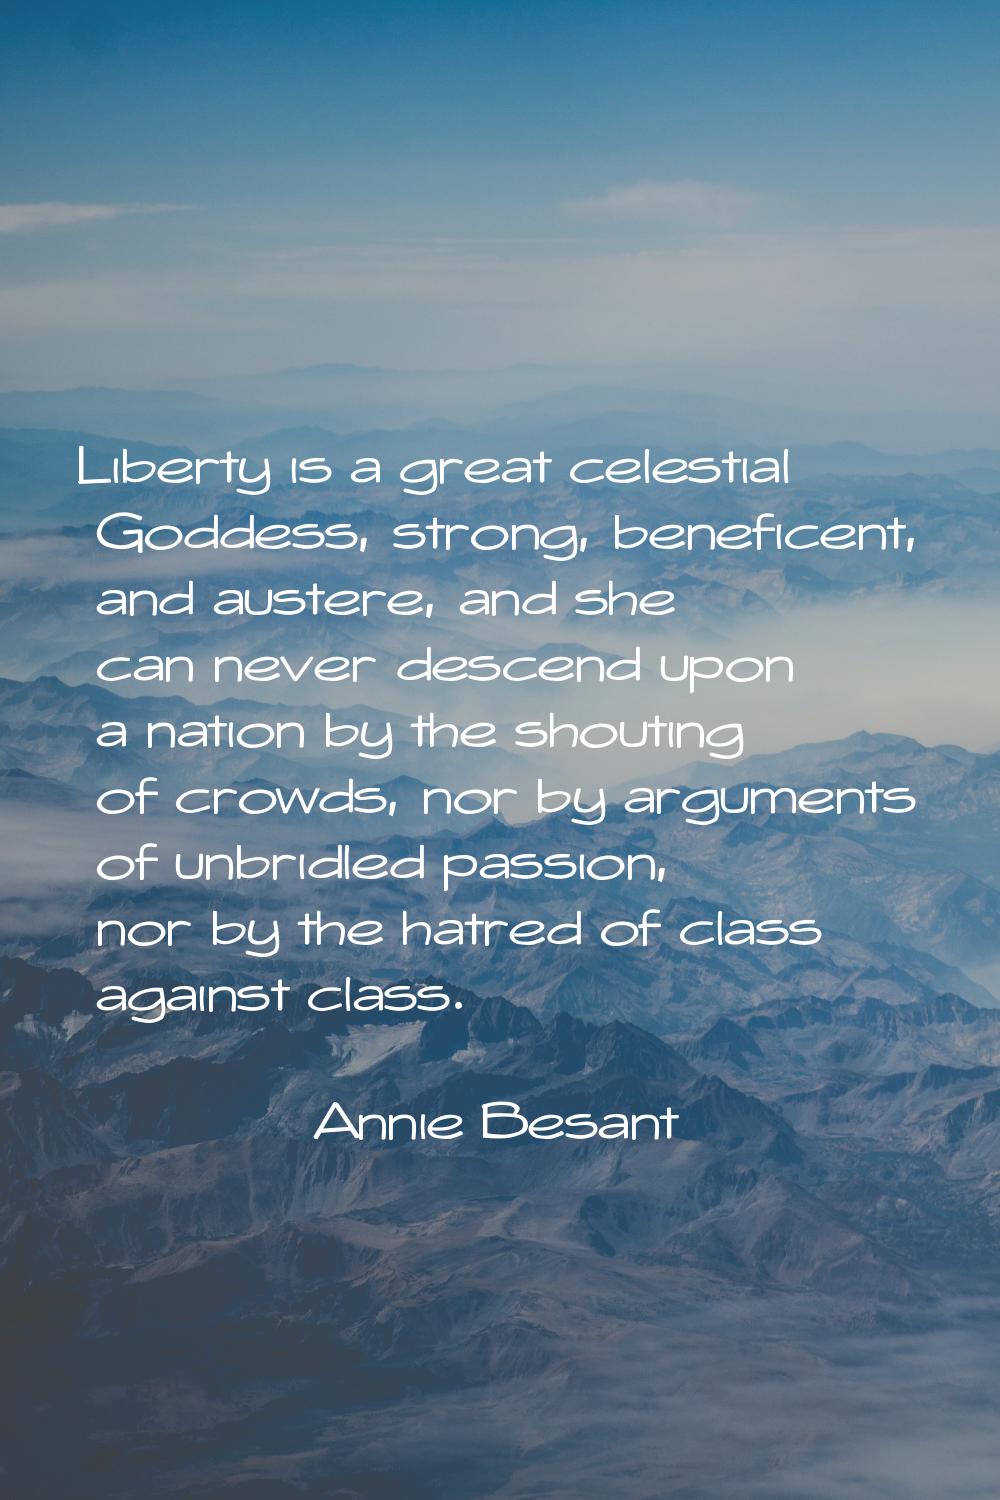 Liberty is a great celestial Goddess, strong, beneficent, and austere, and she can never descend up